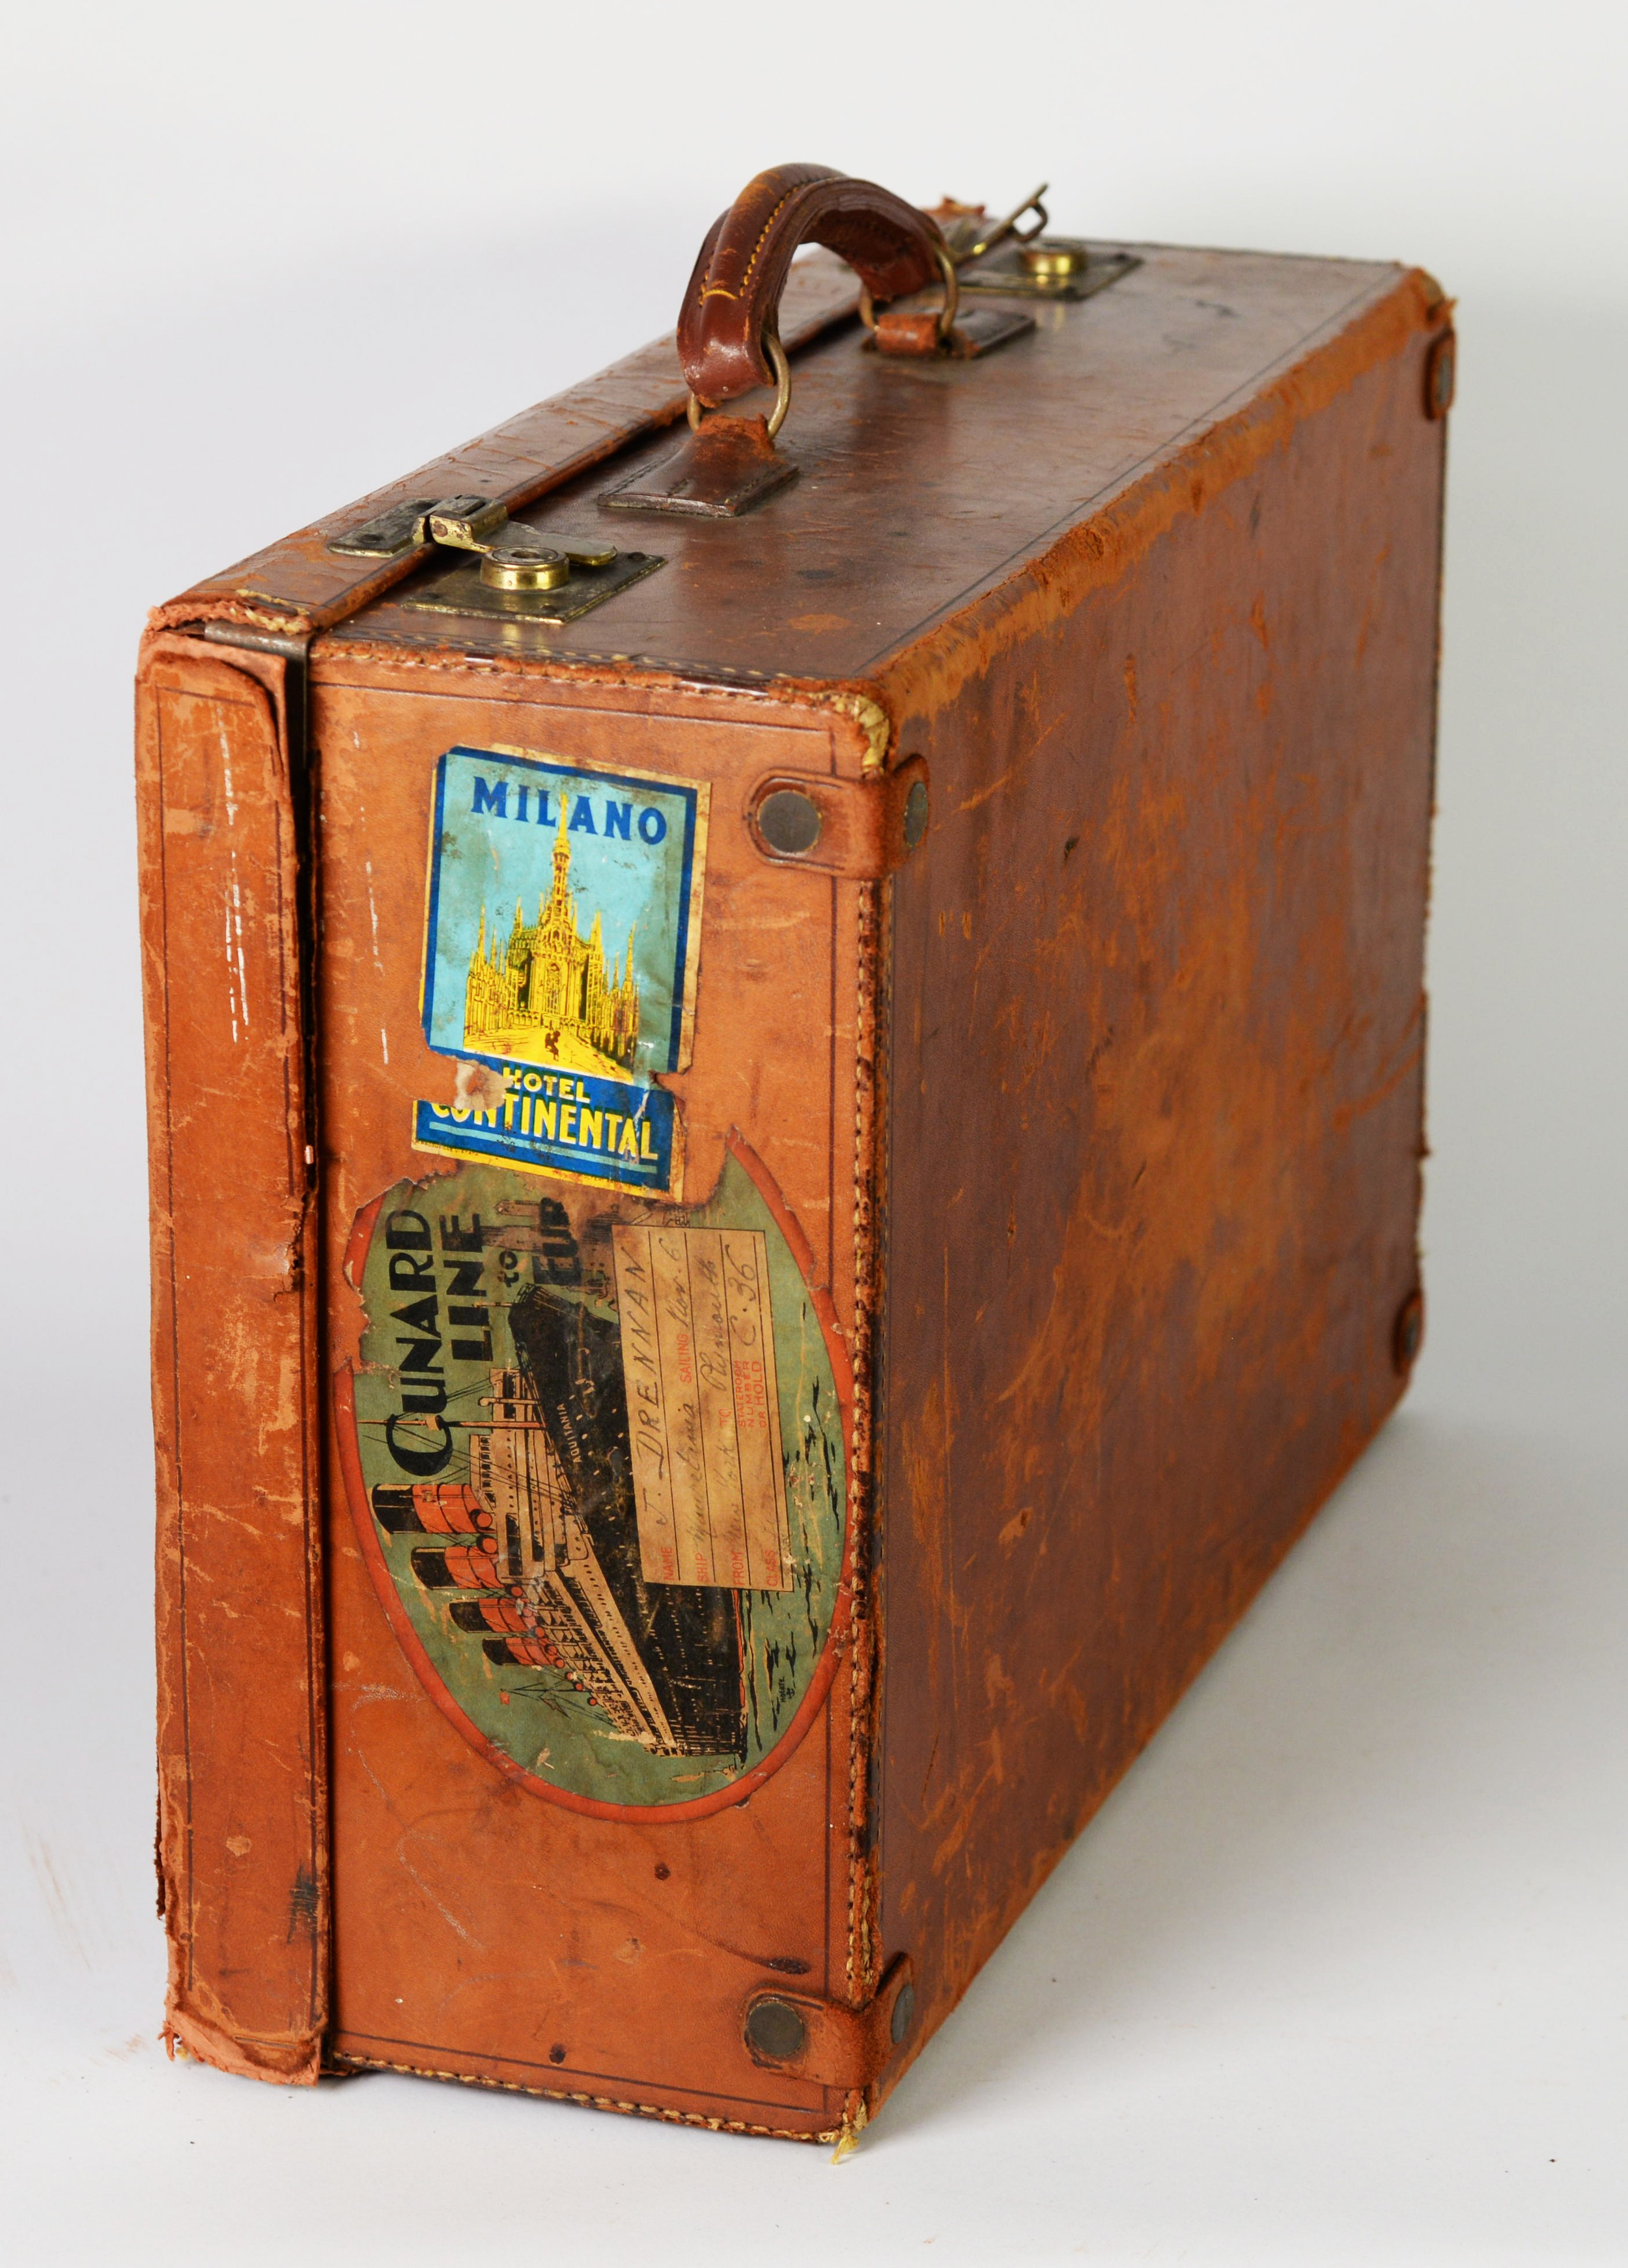 CIRCA 1930s SMALL BROWN LEATHER SUITCASE applied with Cunard Line oval label for travel to Europe